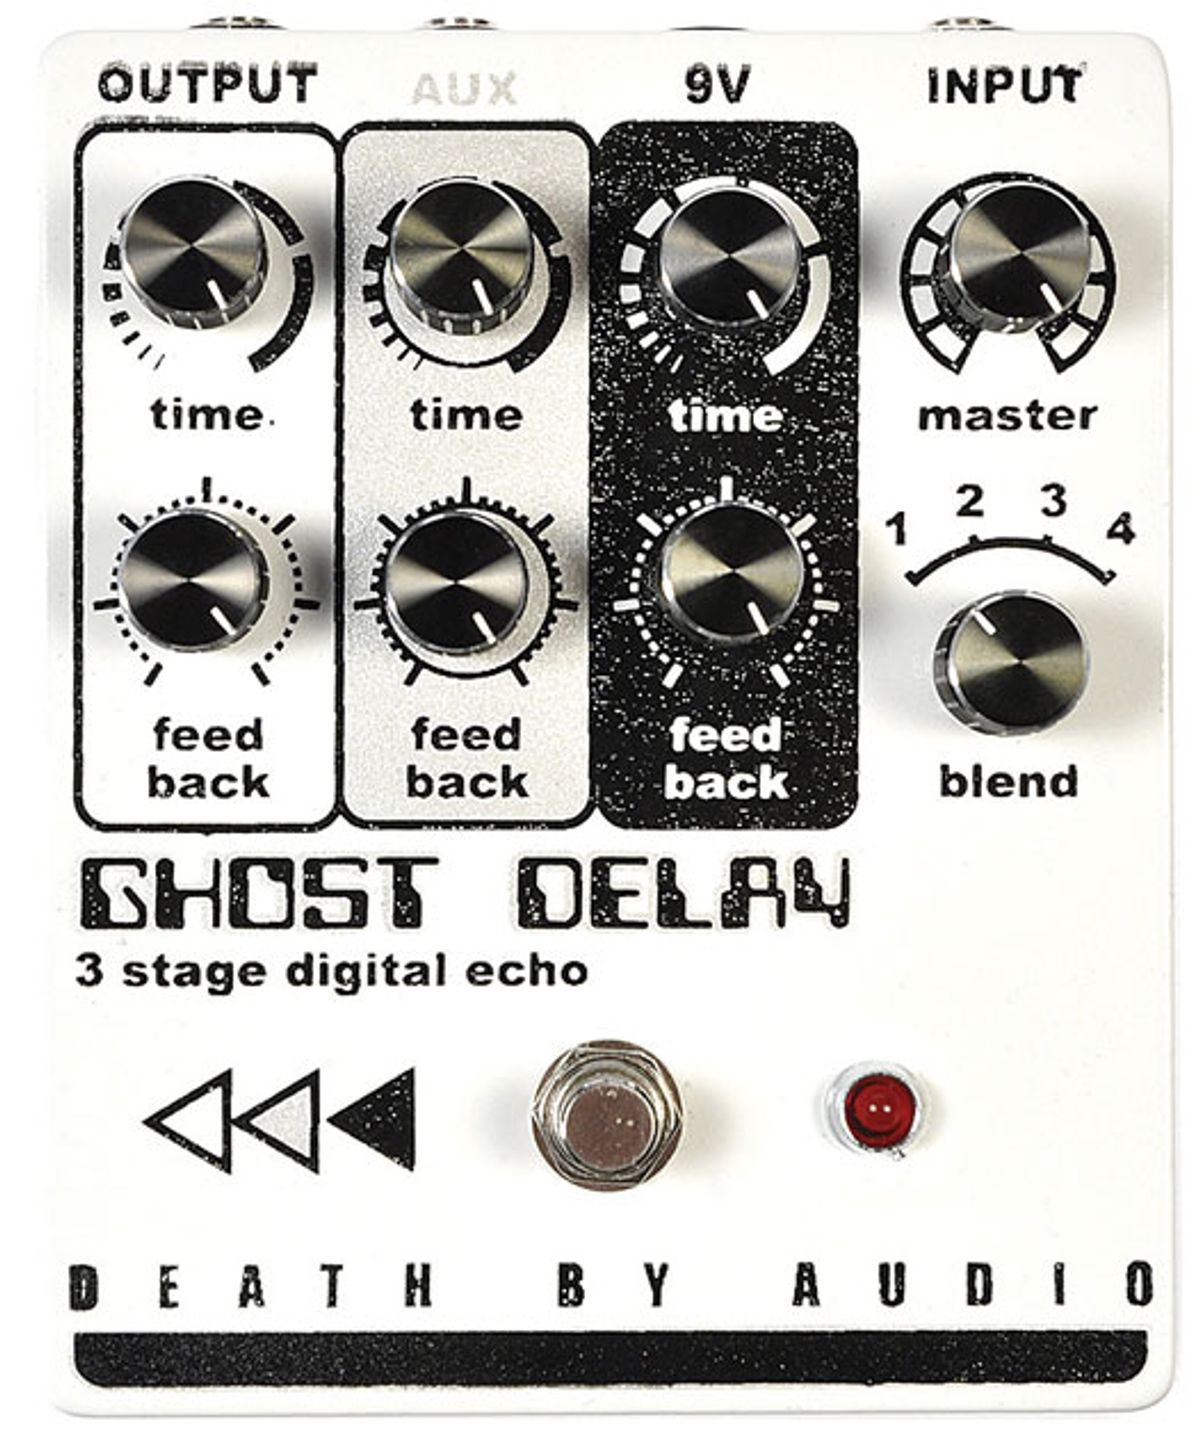 Death By Audio Ghost Delay Review